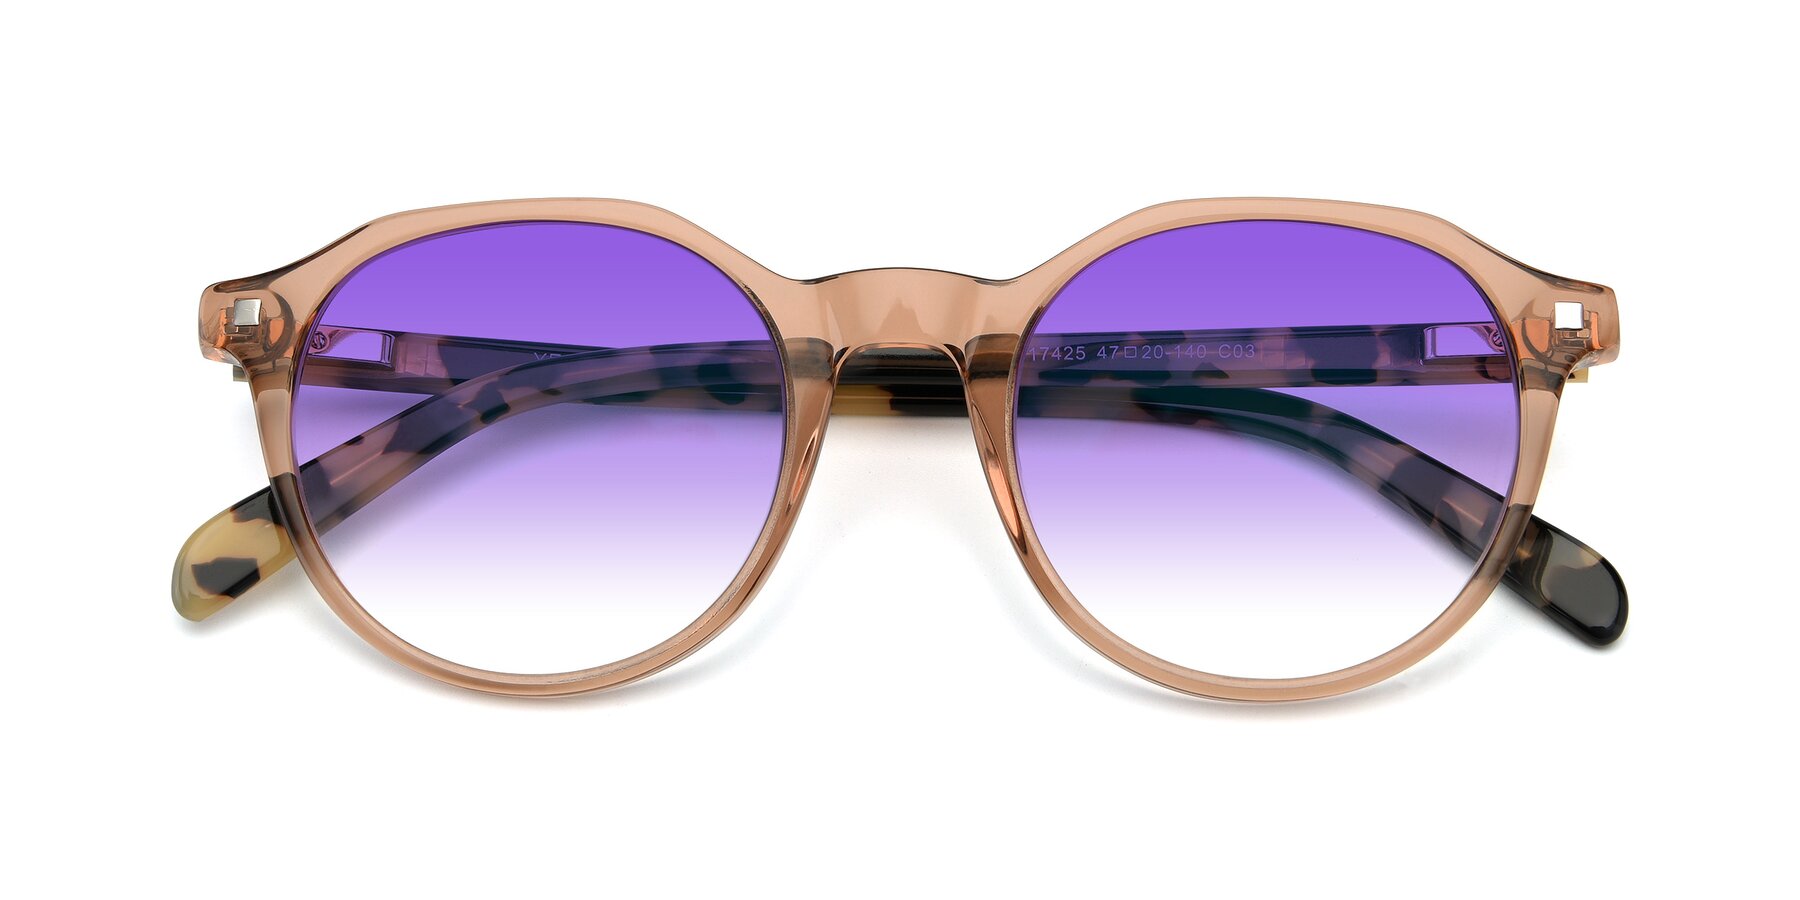 View of 17425 in Transparent Caramel with Purple Gradient Lenses